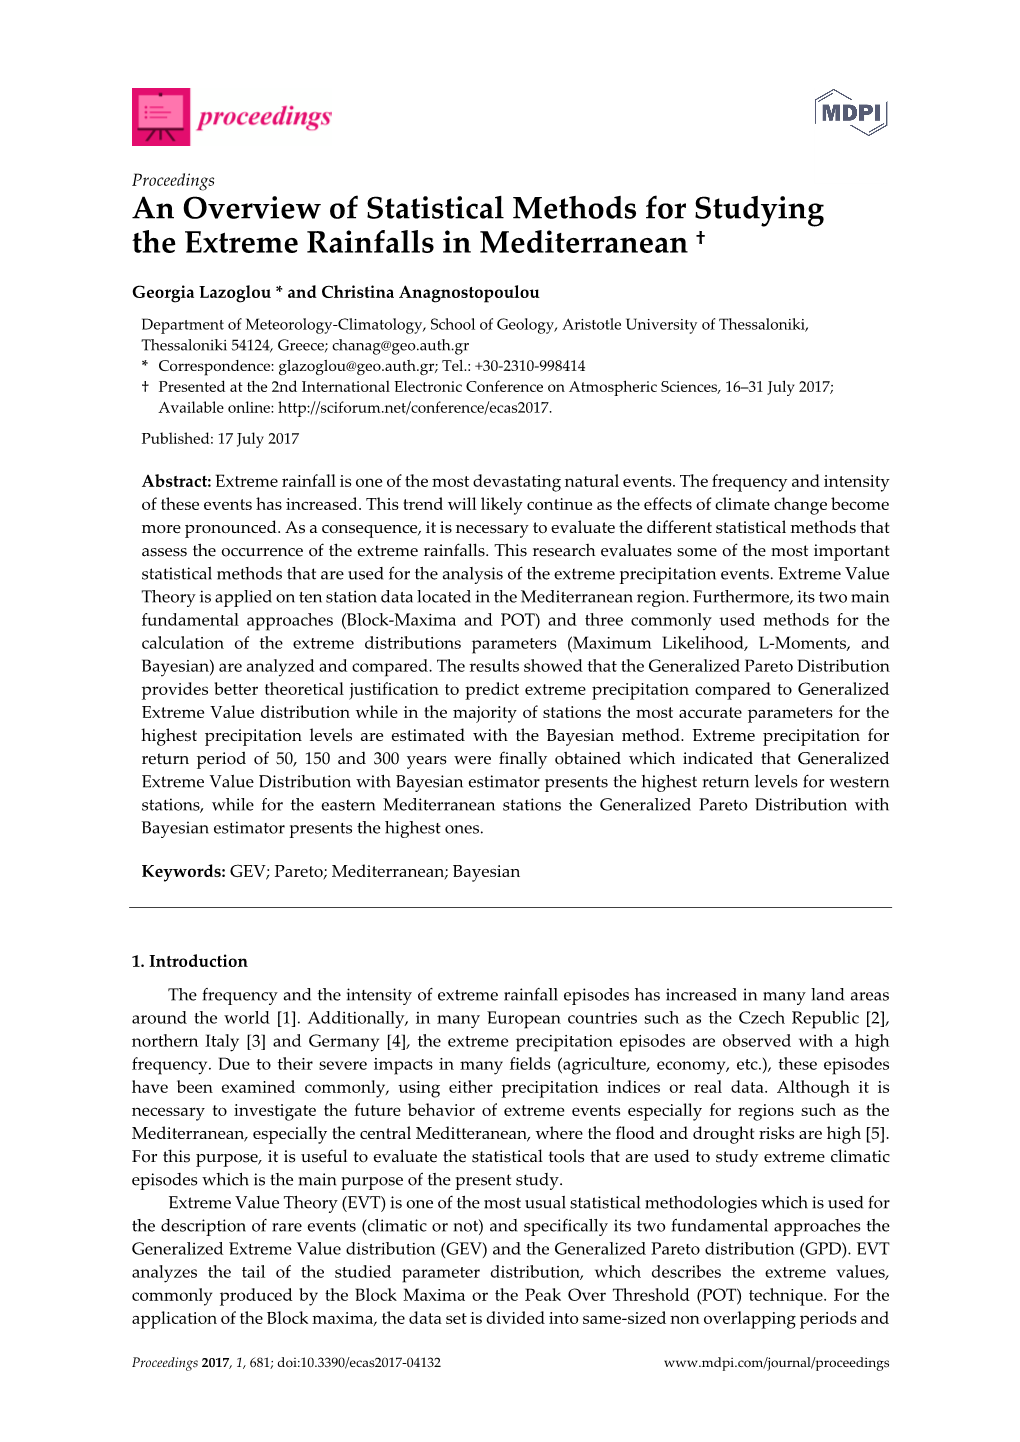 An Overview of Statistical Methods for Studying the Extreme Rainfalls in Mediterranean †